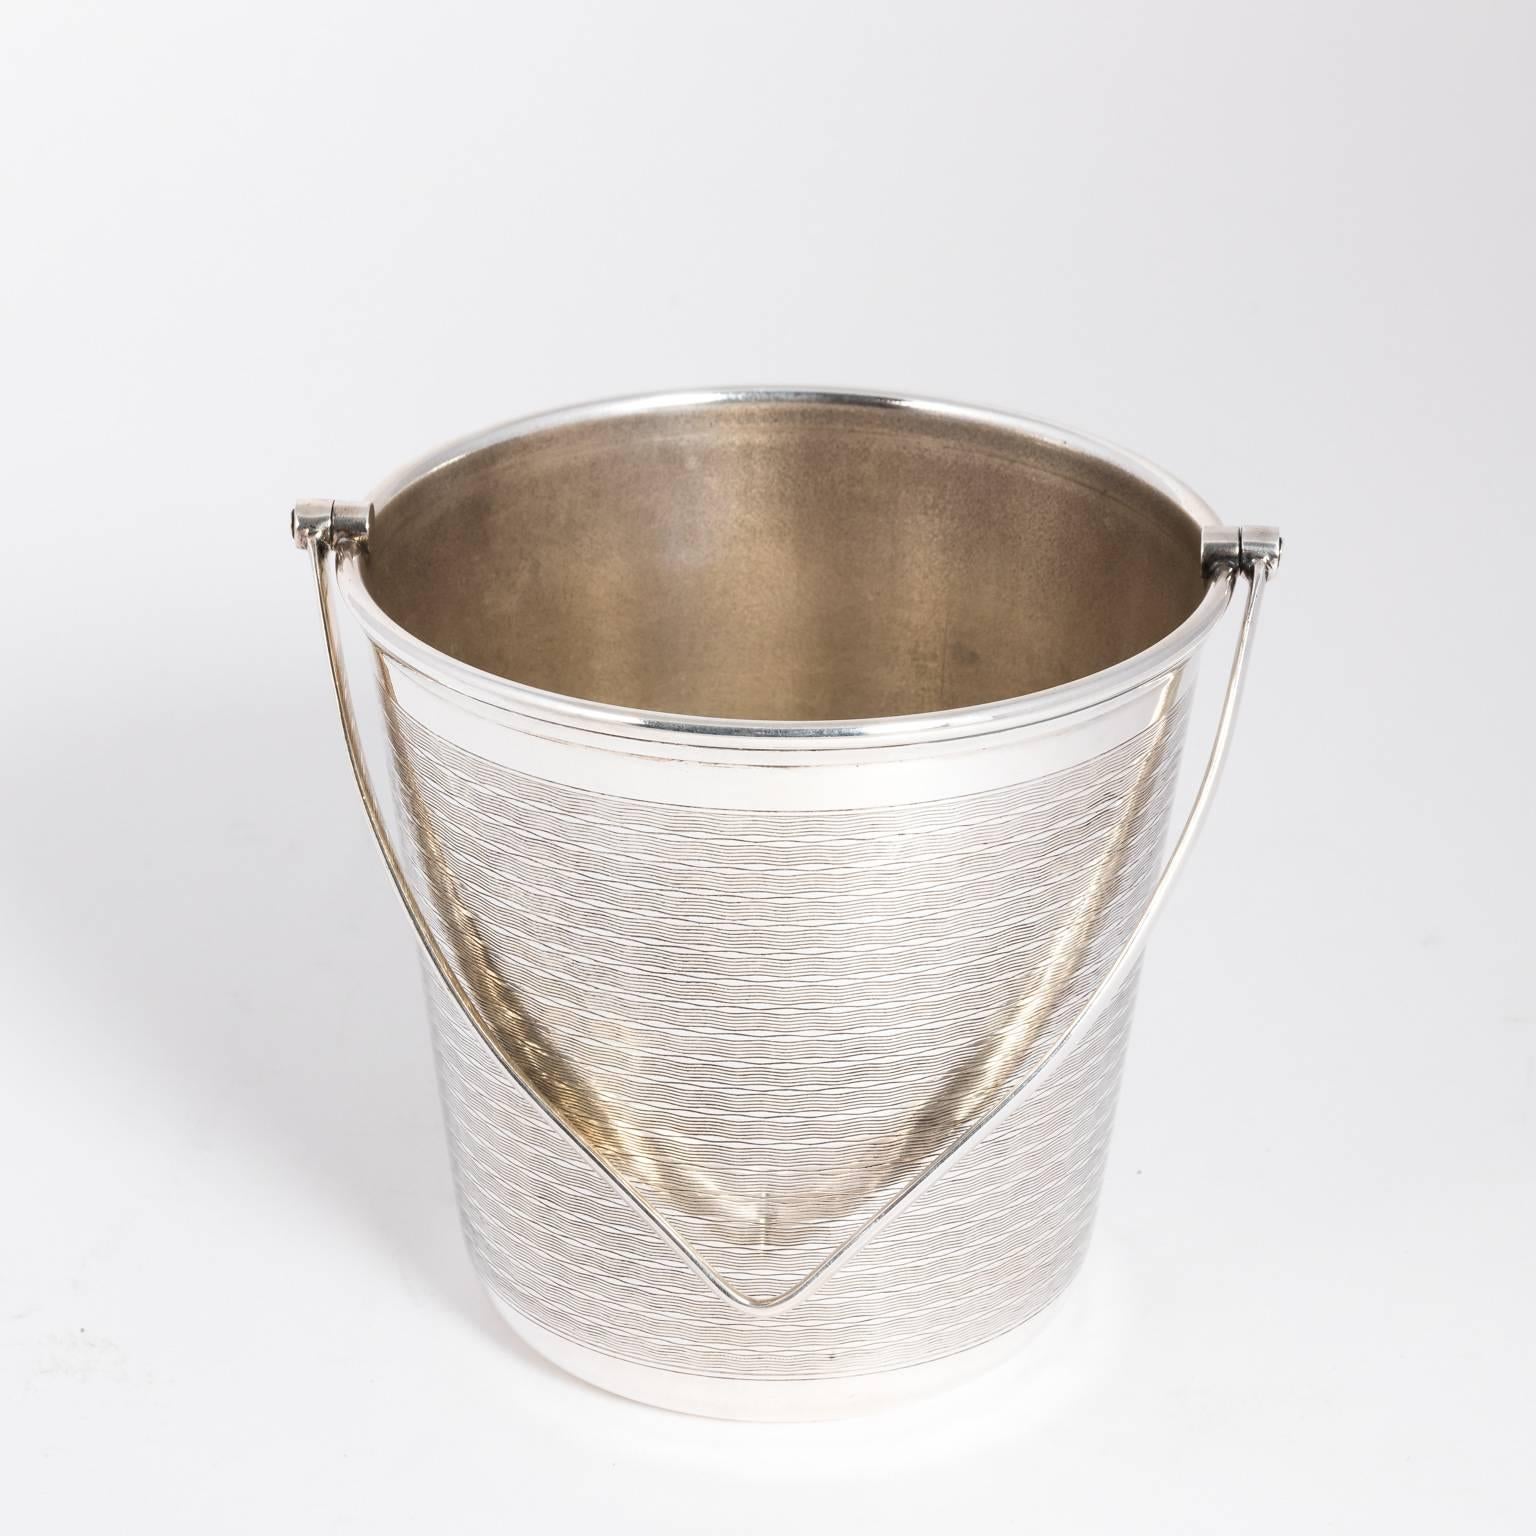 Art Deco style English silver plated ice pail with an arched handle and engine turned detailing, circa 1930.
 